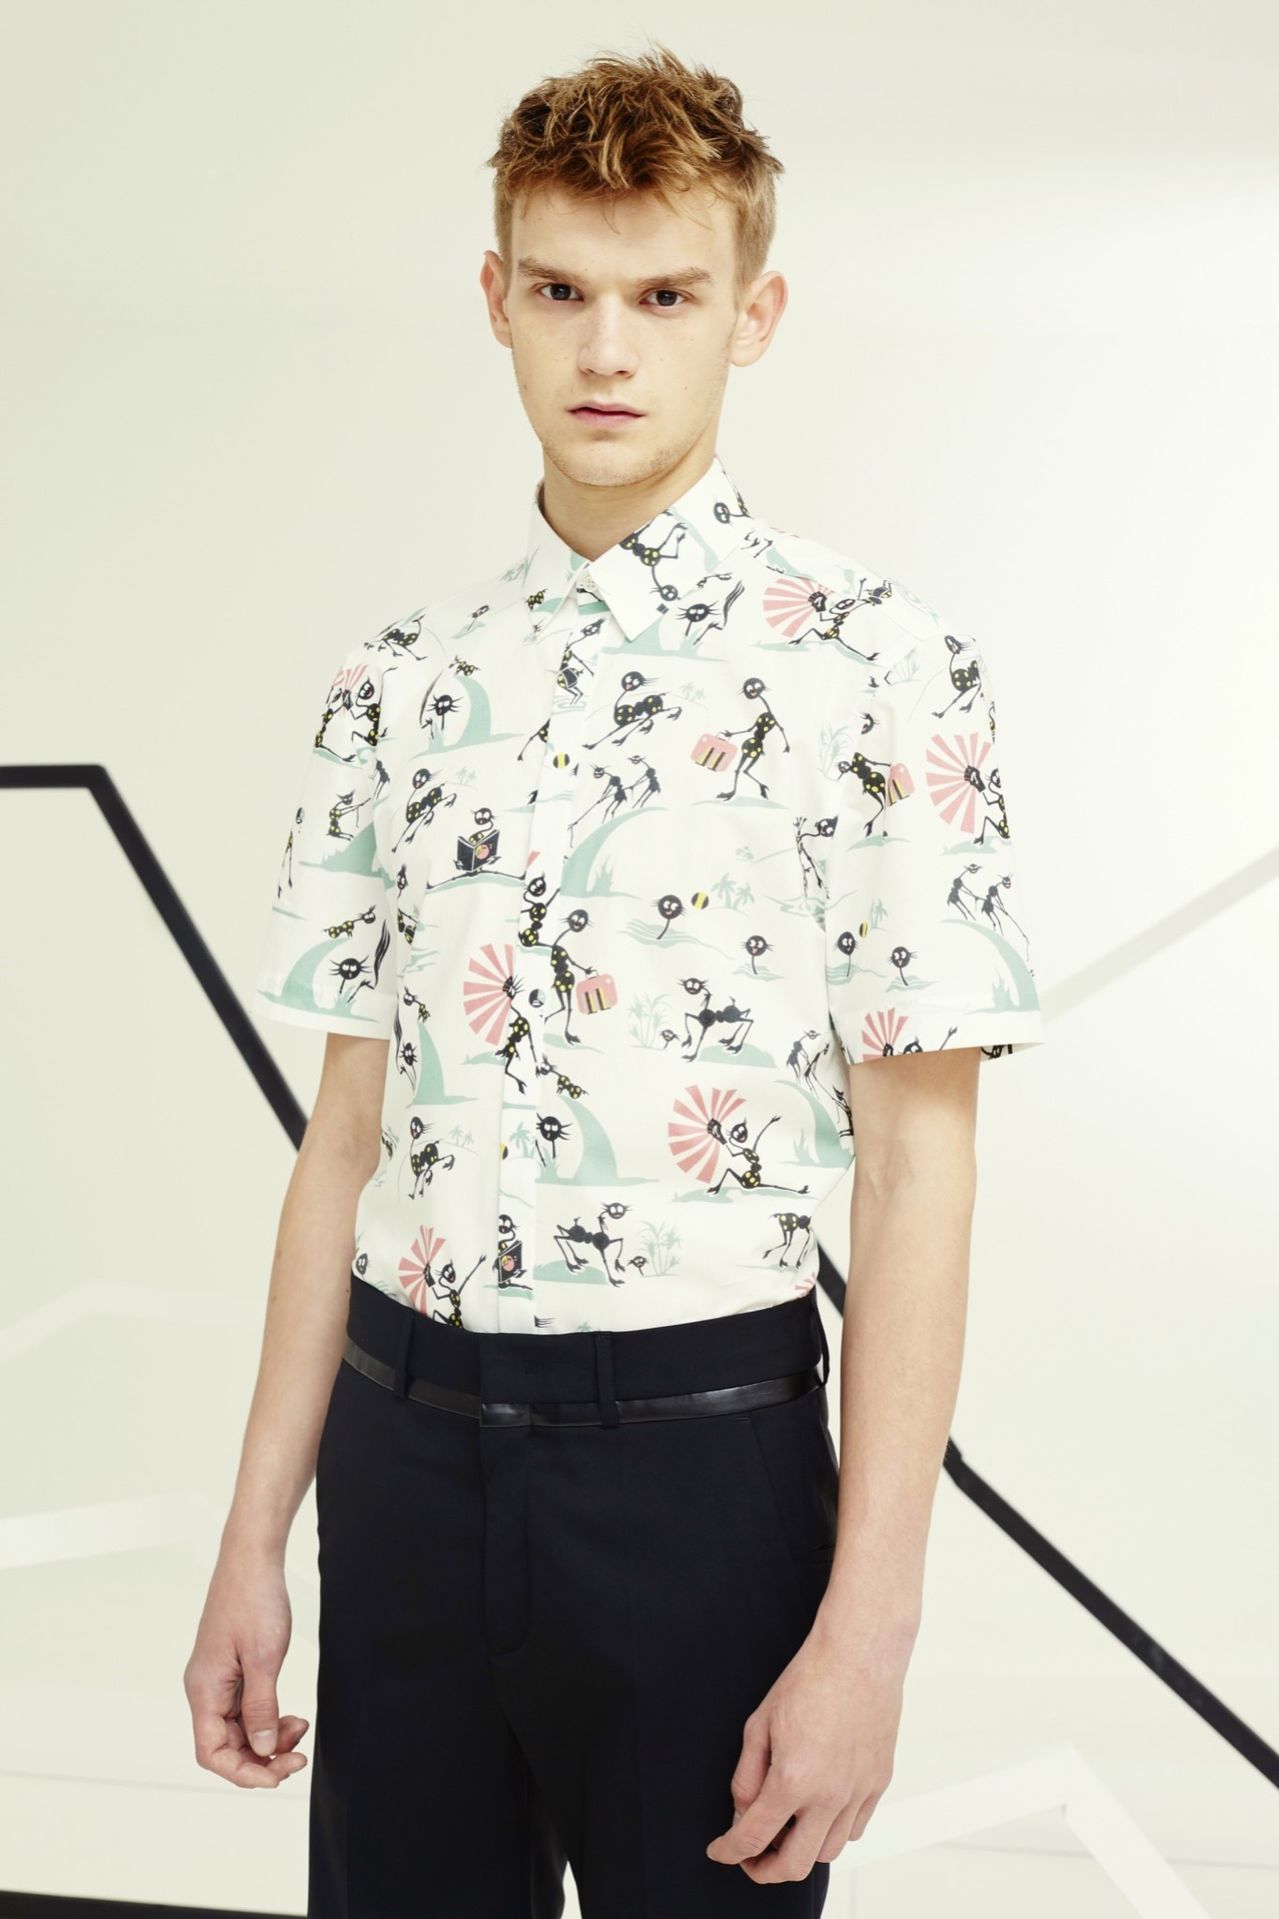 Chalayan Does Quirky Business for Spring/Summer 2016 Menswear Collection